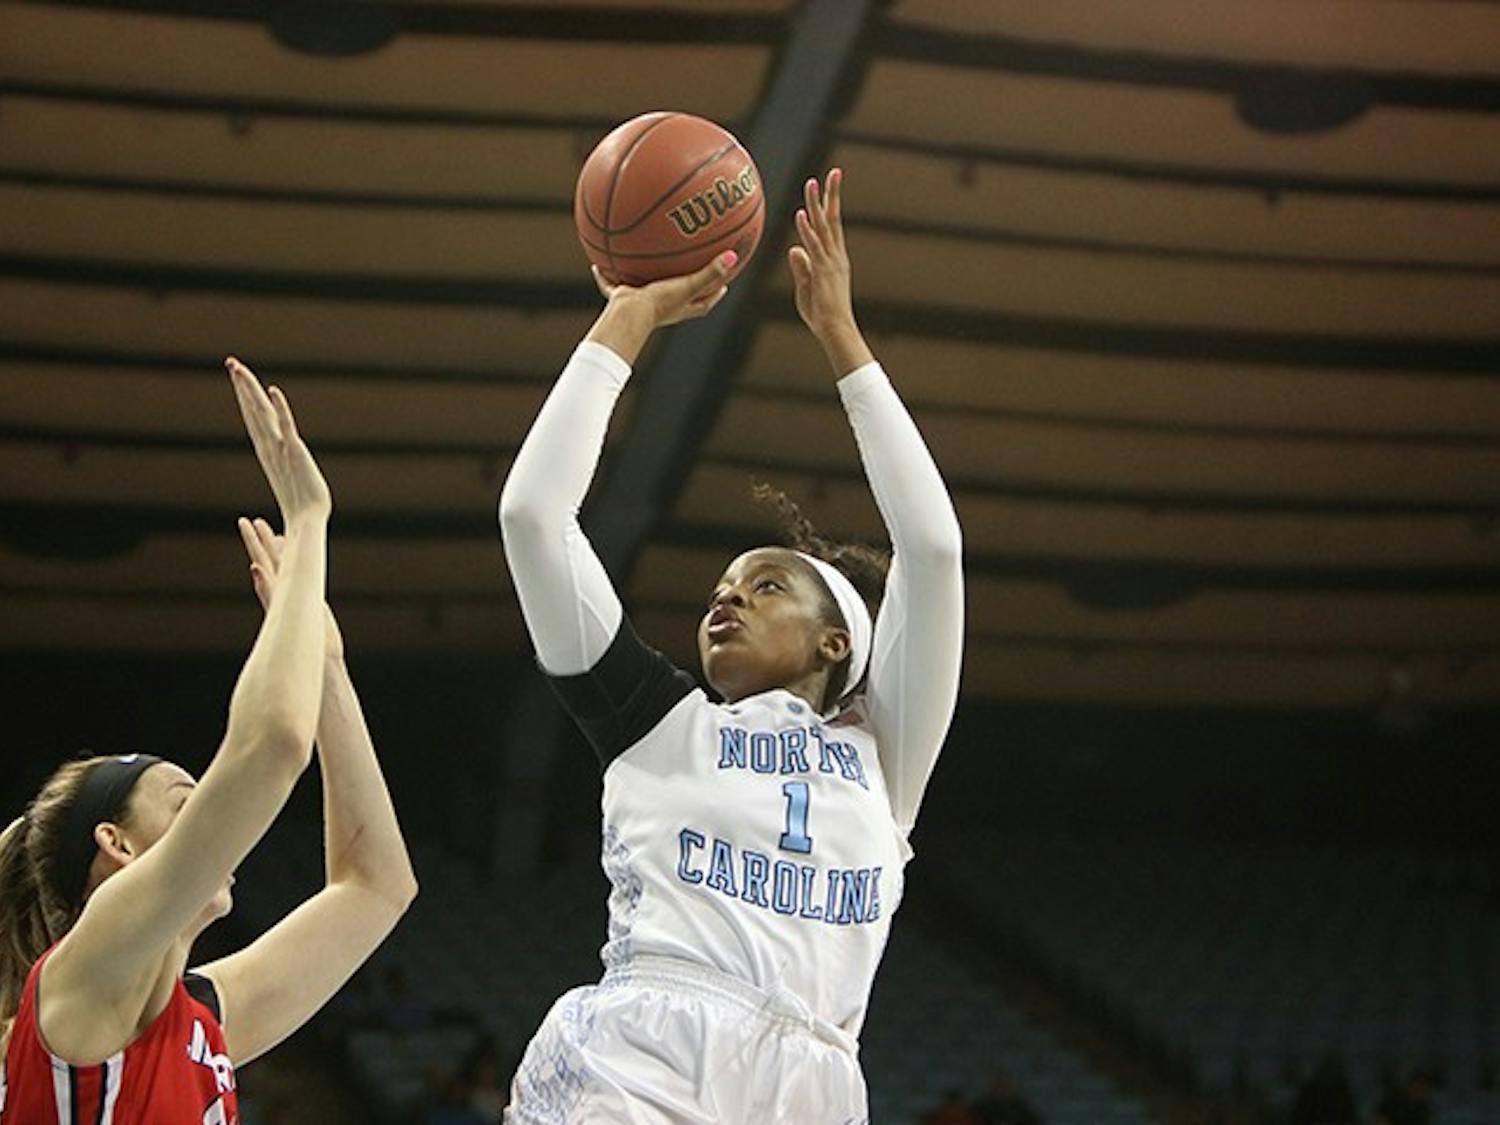 The Women's basketball team took down Liberty Saturday afternoon to advance to the second round of the NCAA tournament. 